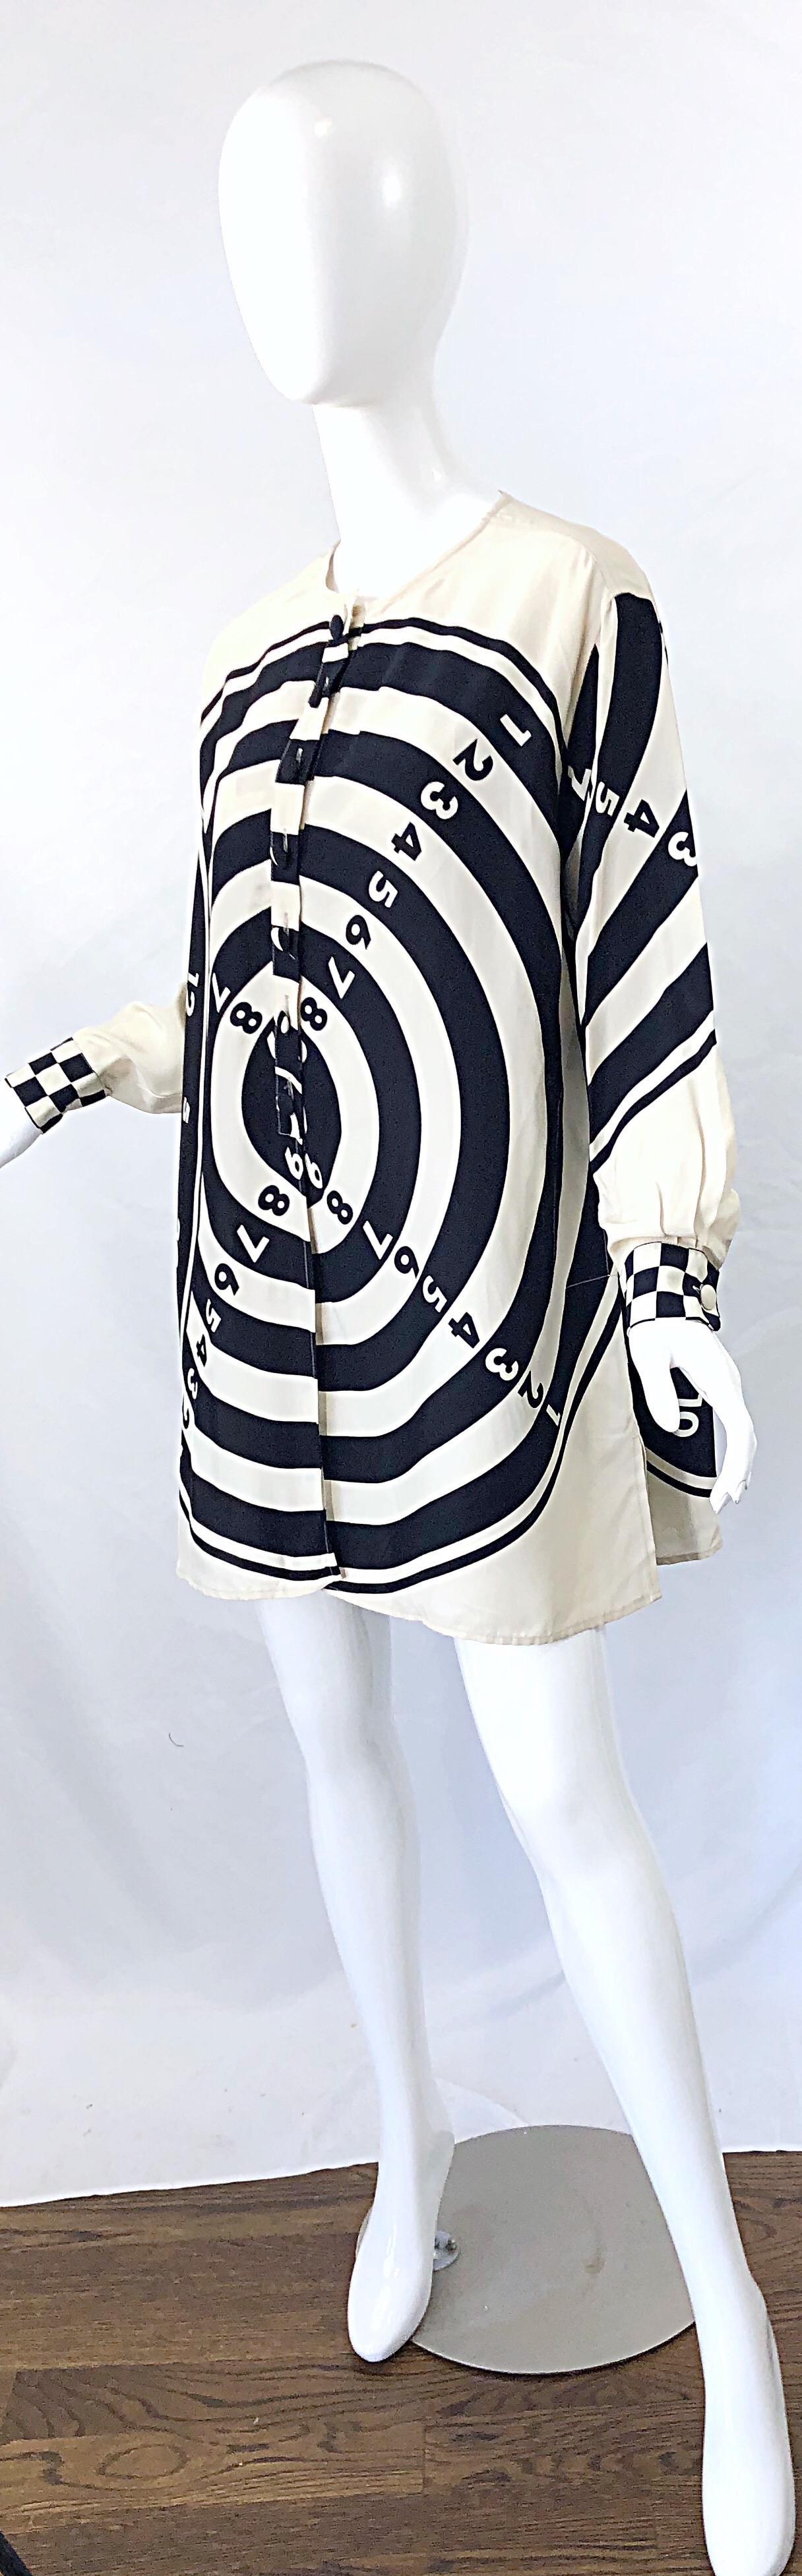 Women's 1980s Moschino Cheap & Chic Bullseye Black and White Size 8 Vintage Tunic Dress For Sale